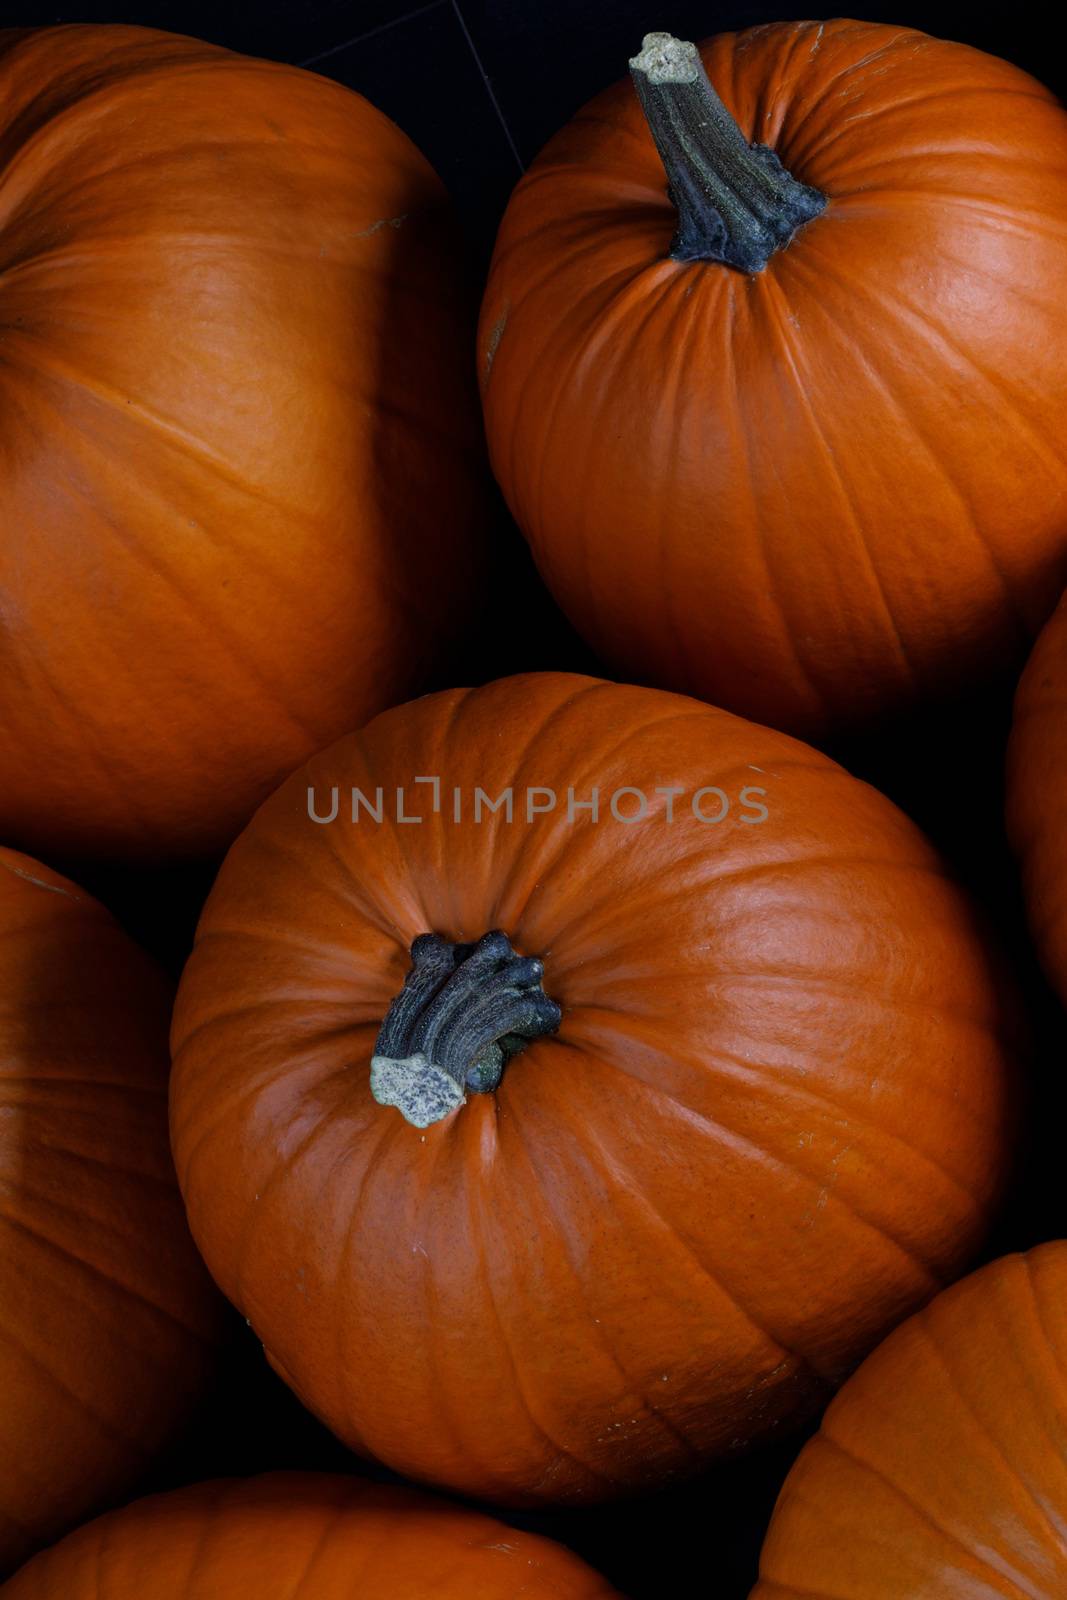 Many pumpkins collection by Yellowj